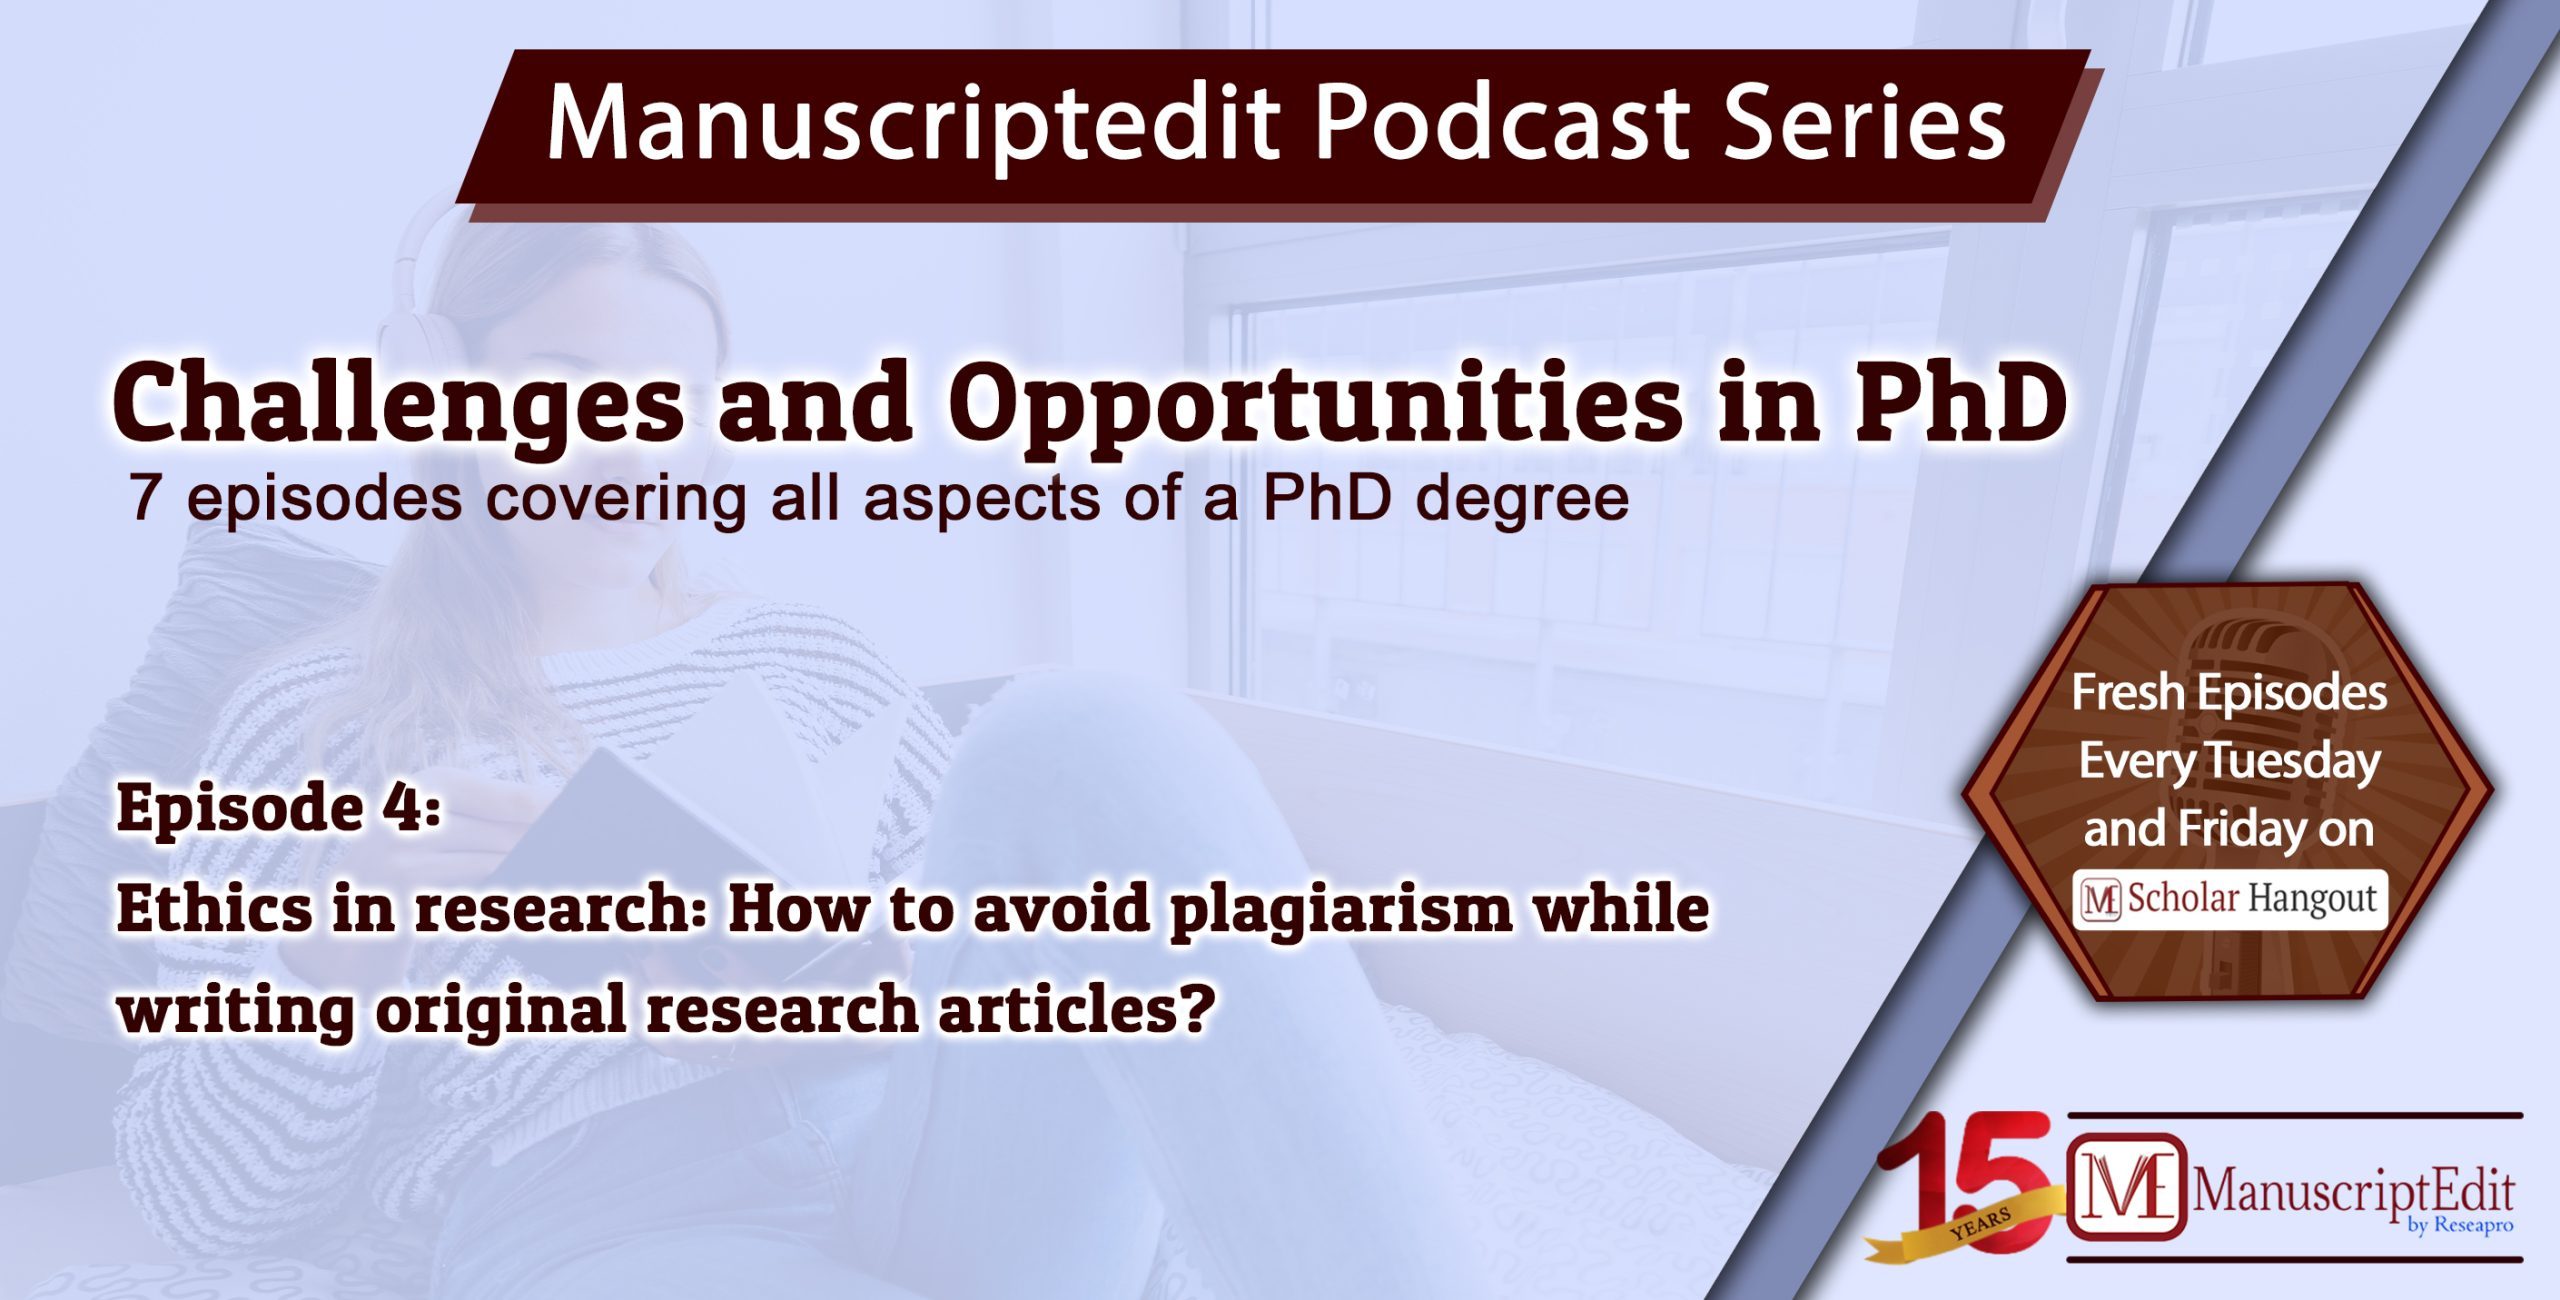 Episode 4: Ethics in research: How to avoid plagiarism while writing original research articles